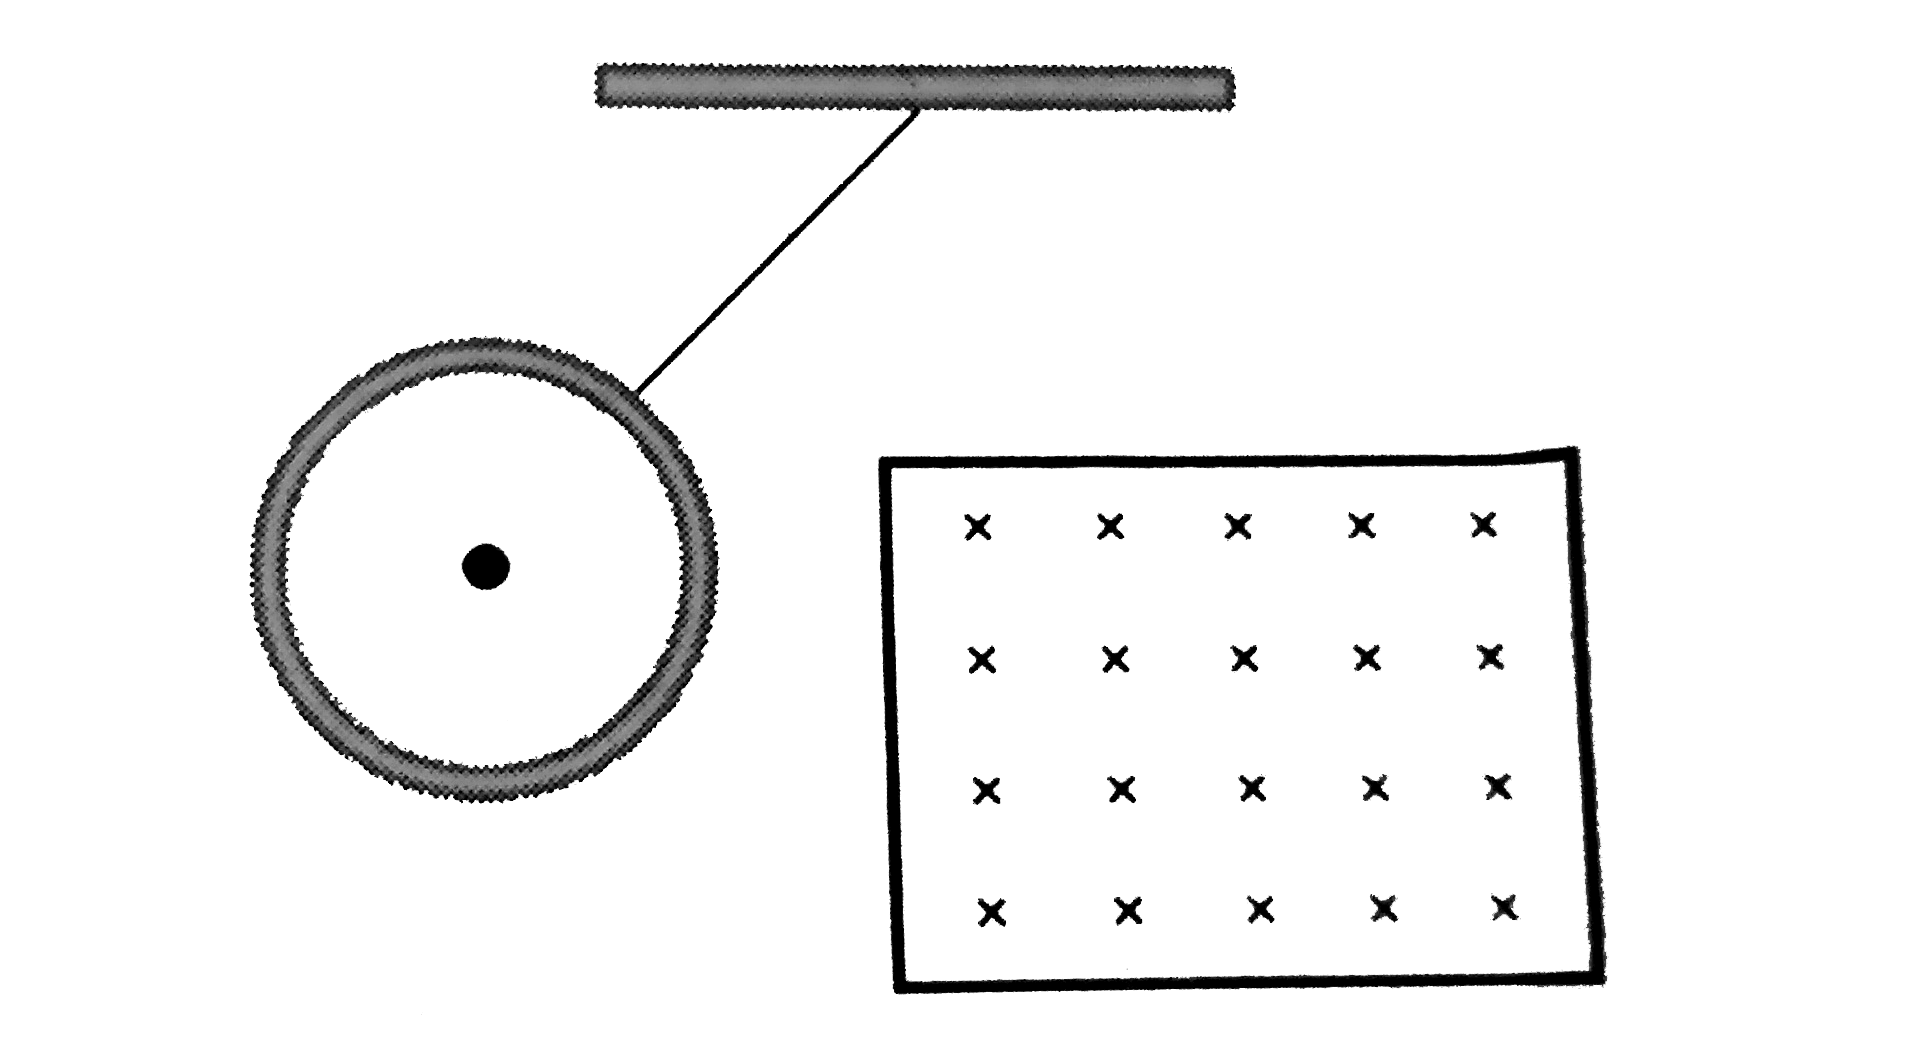 A metallic ring connected to a rod oscillates freely like a pendulum.